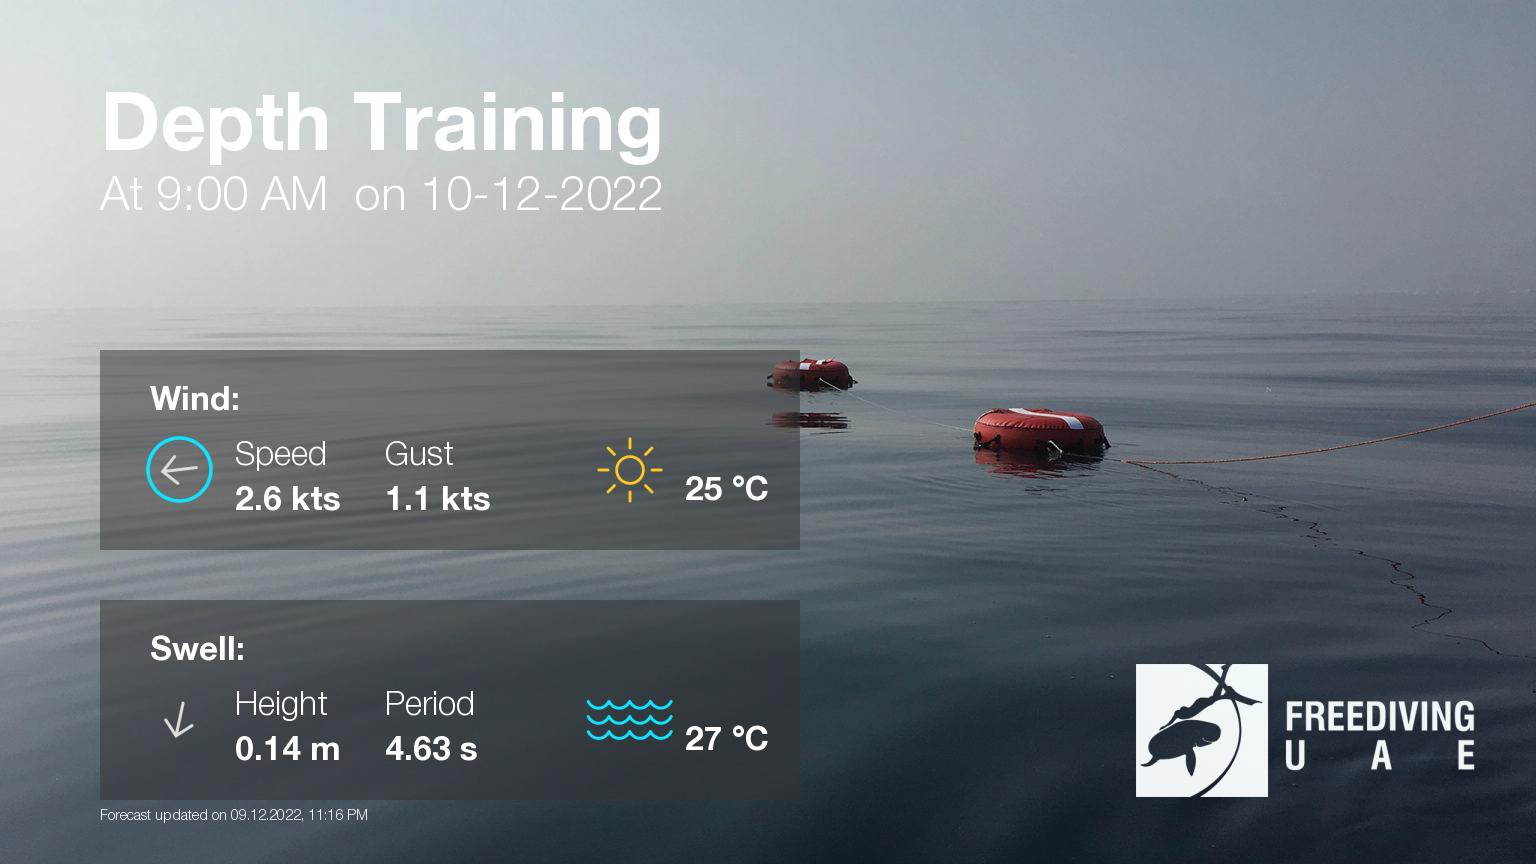 Expected weather during Depth Training on Sat, Dec 10, at 9:00 AM